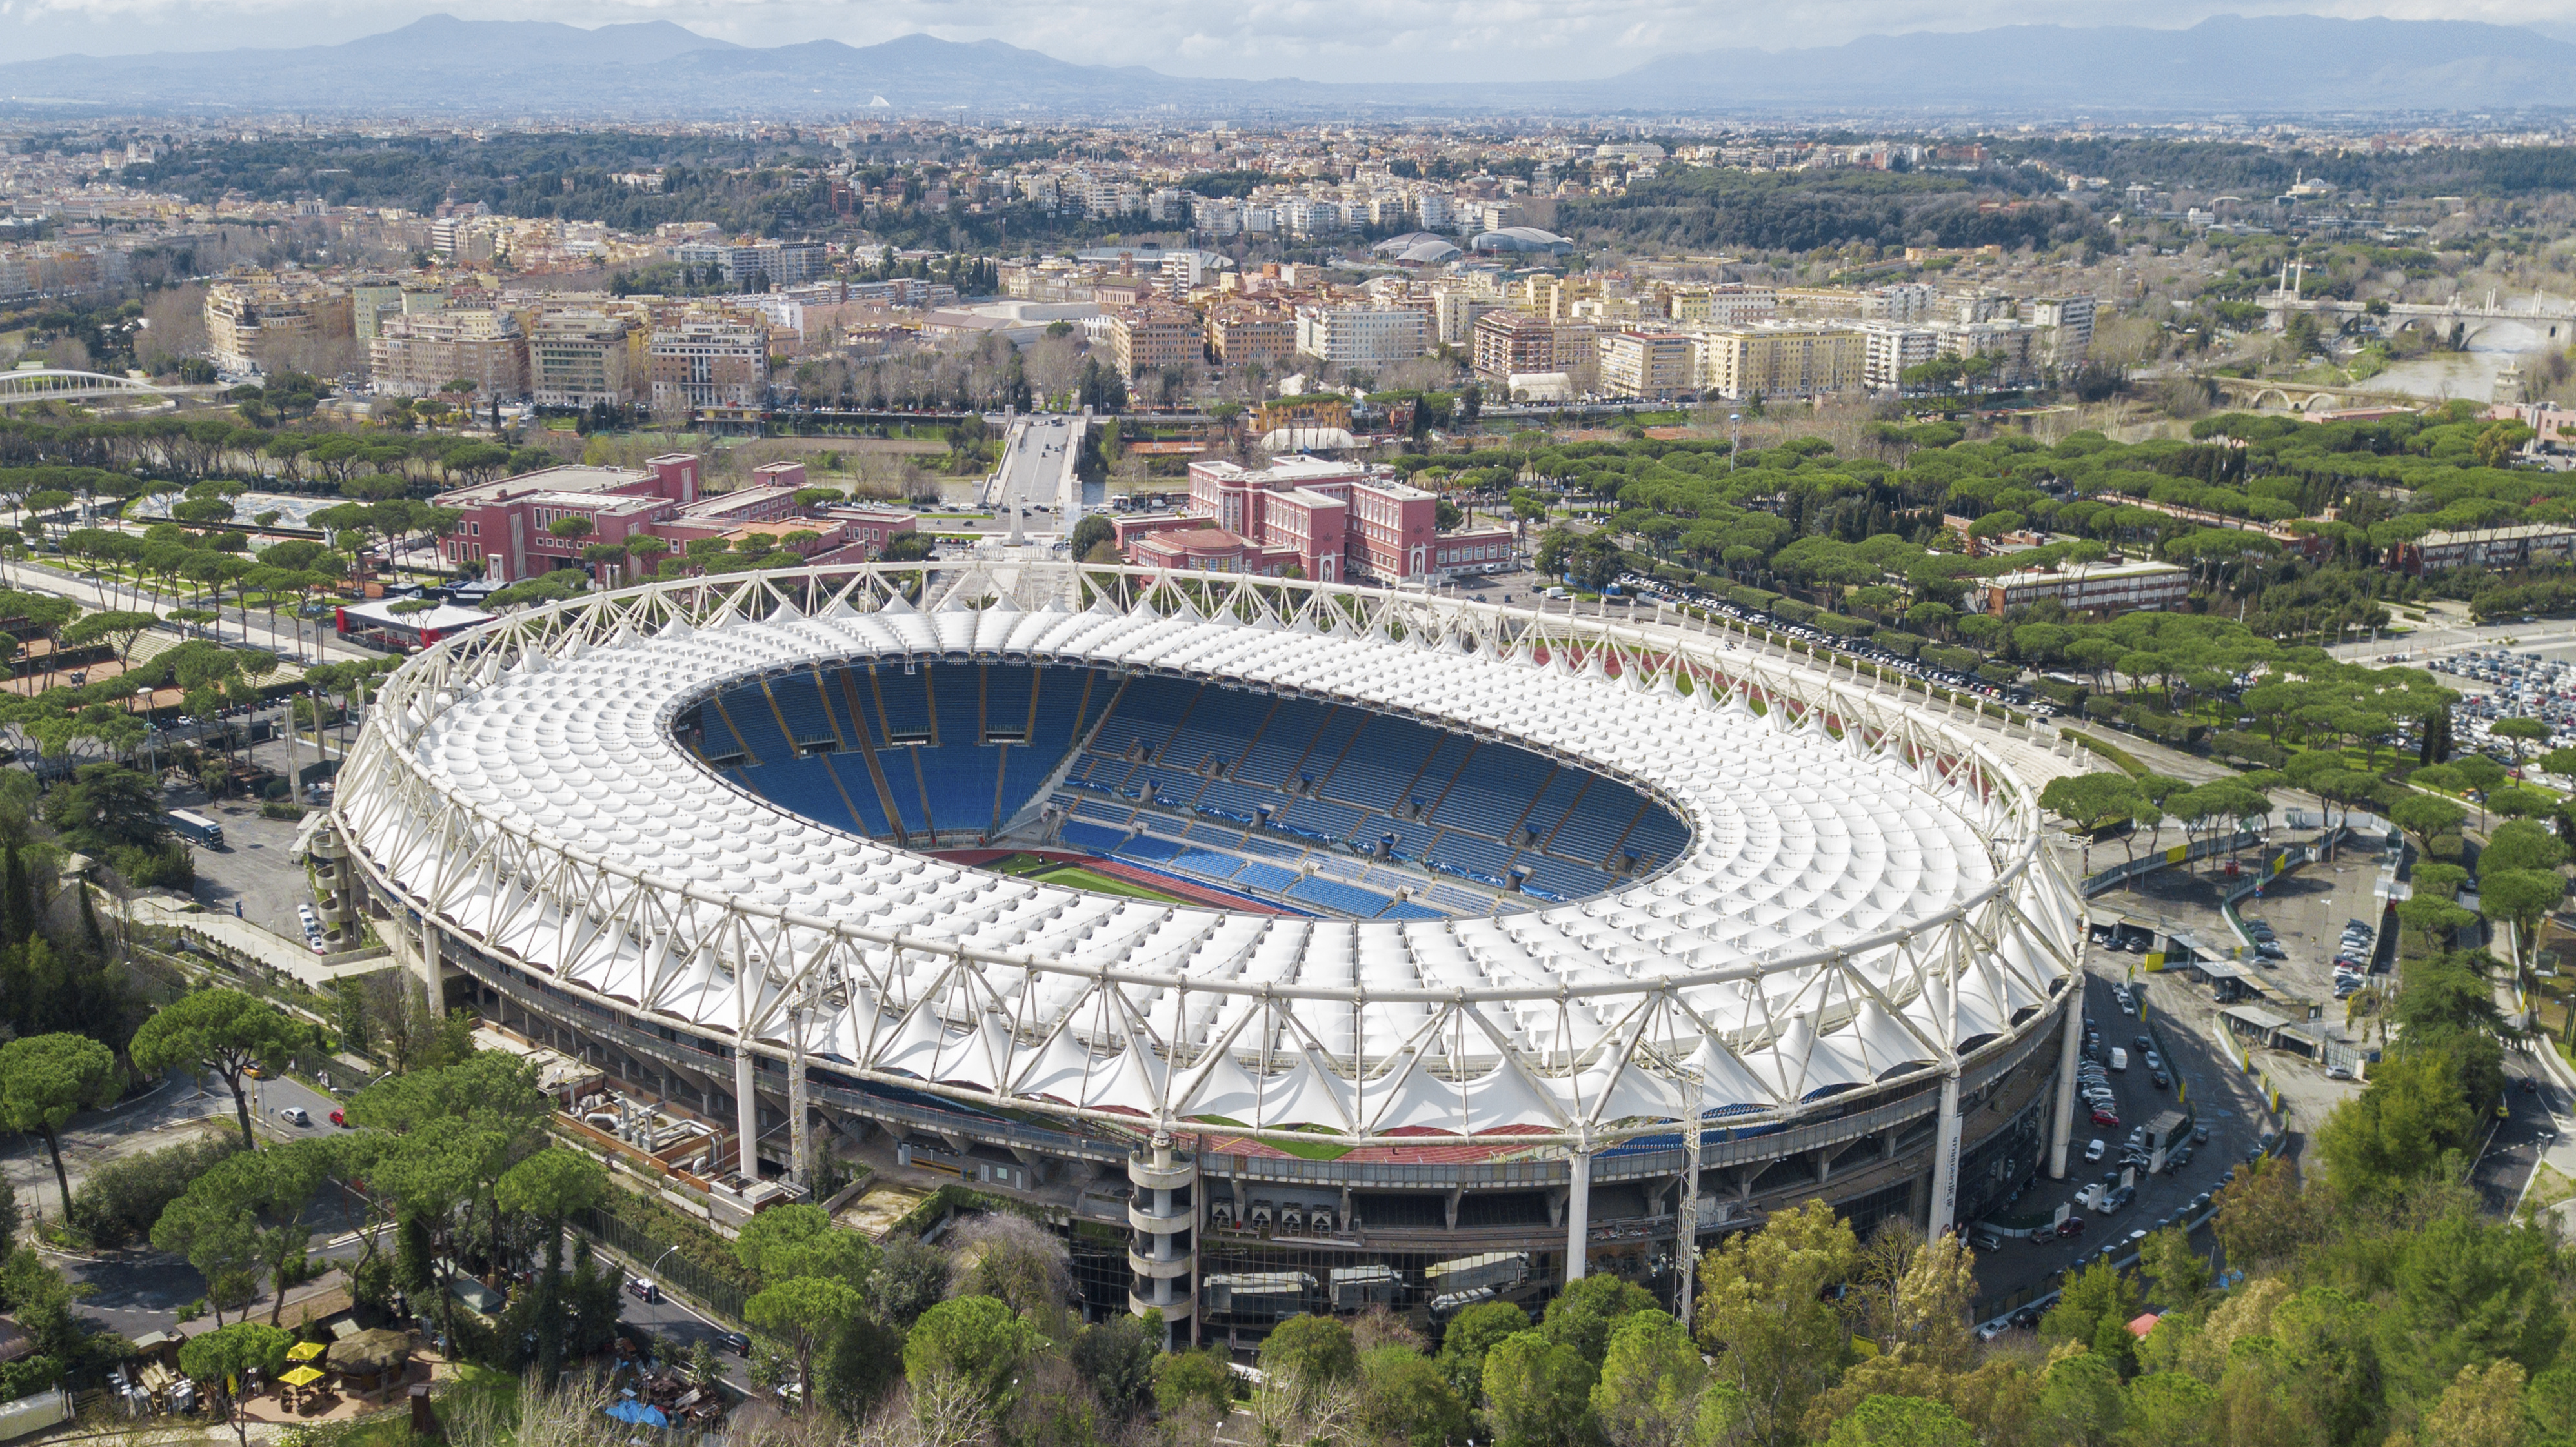 Aerial view of the Olympic Stadium in Rome, Italy. On this field are